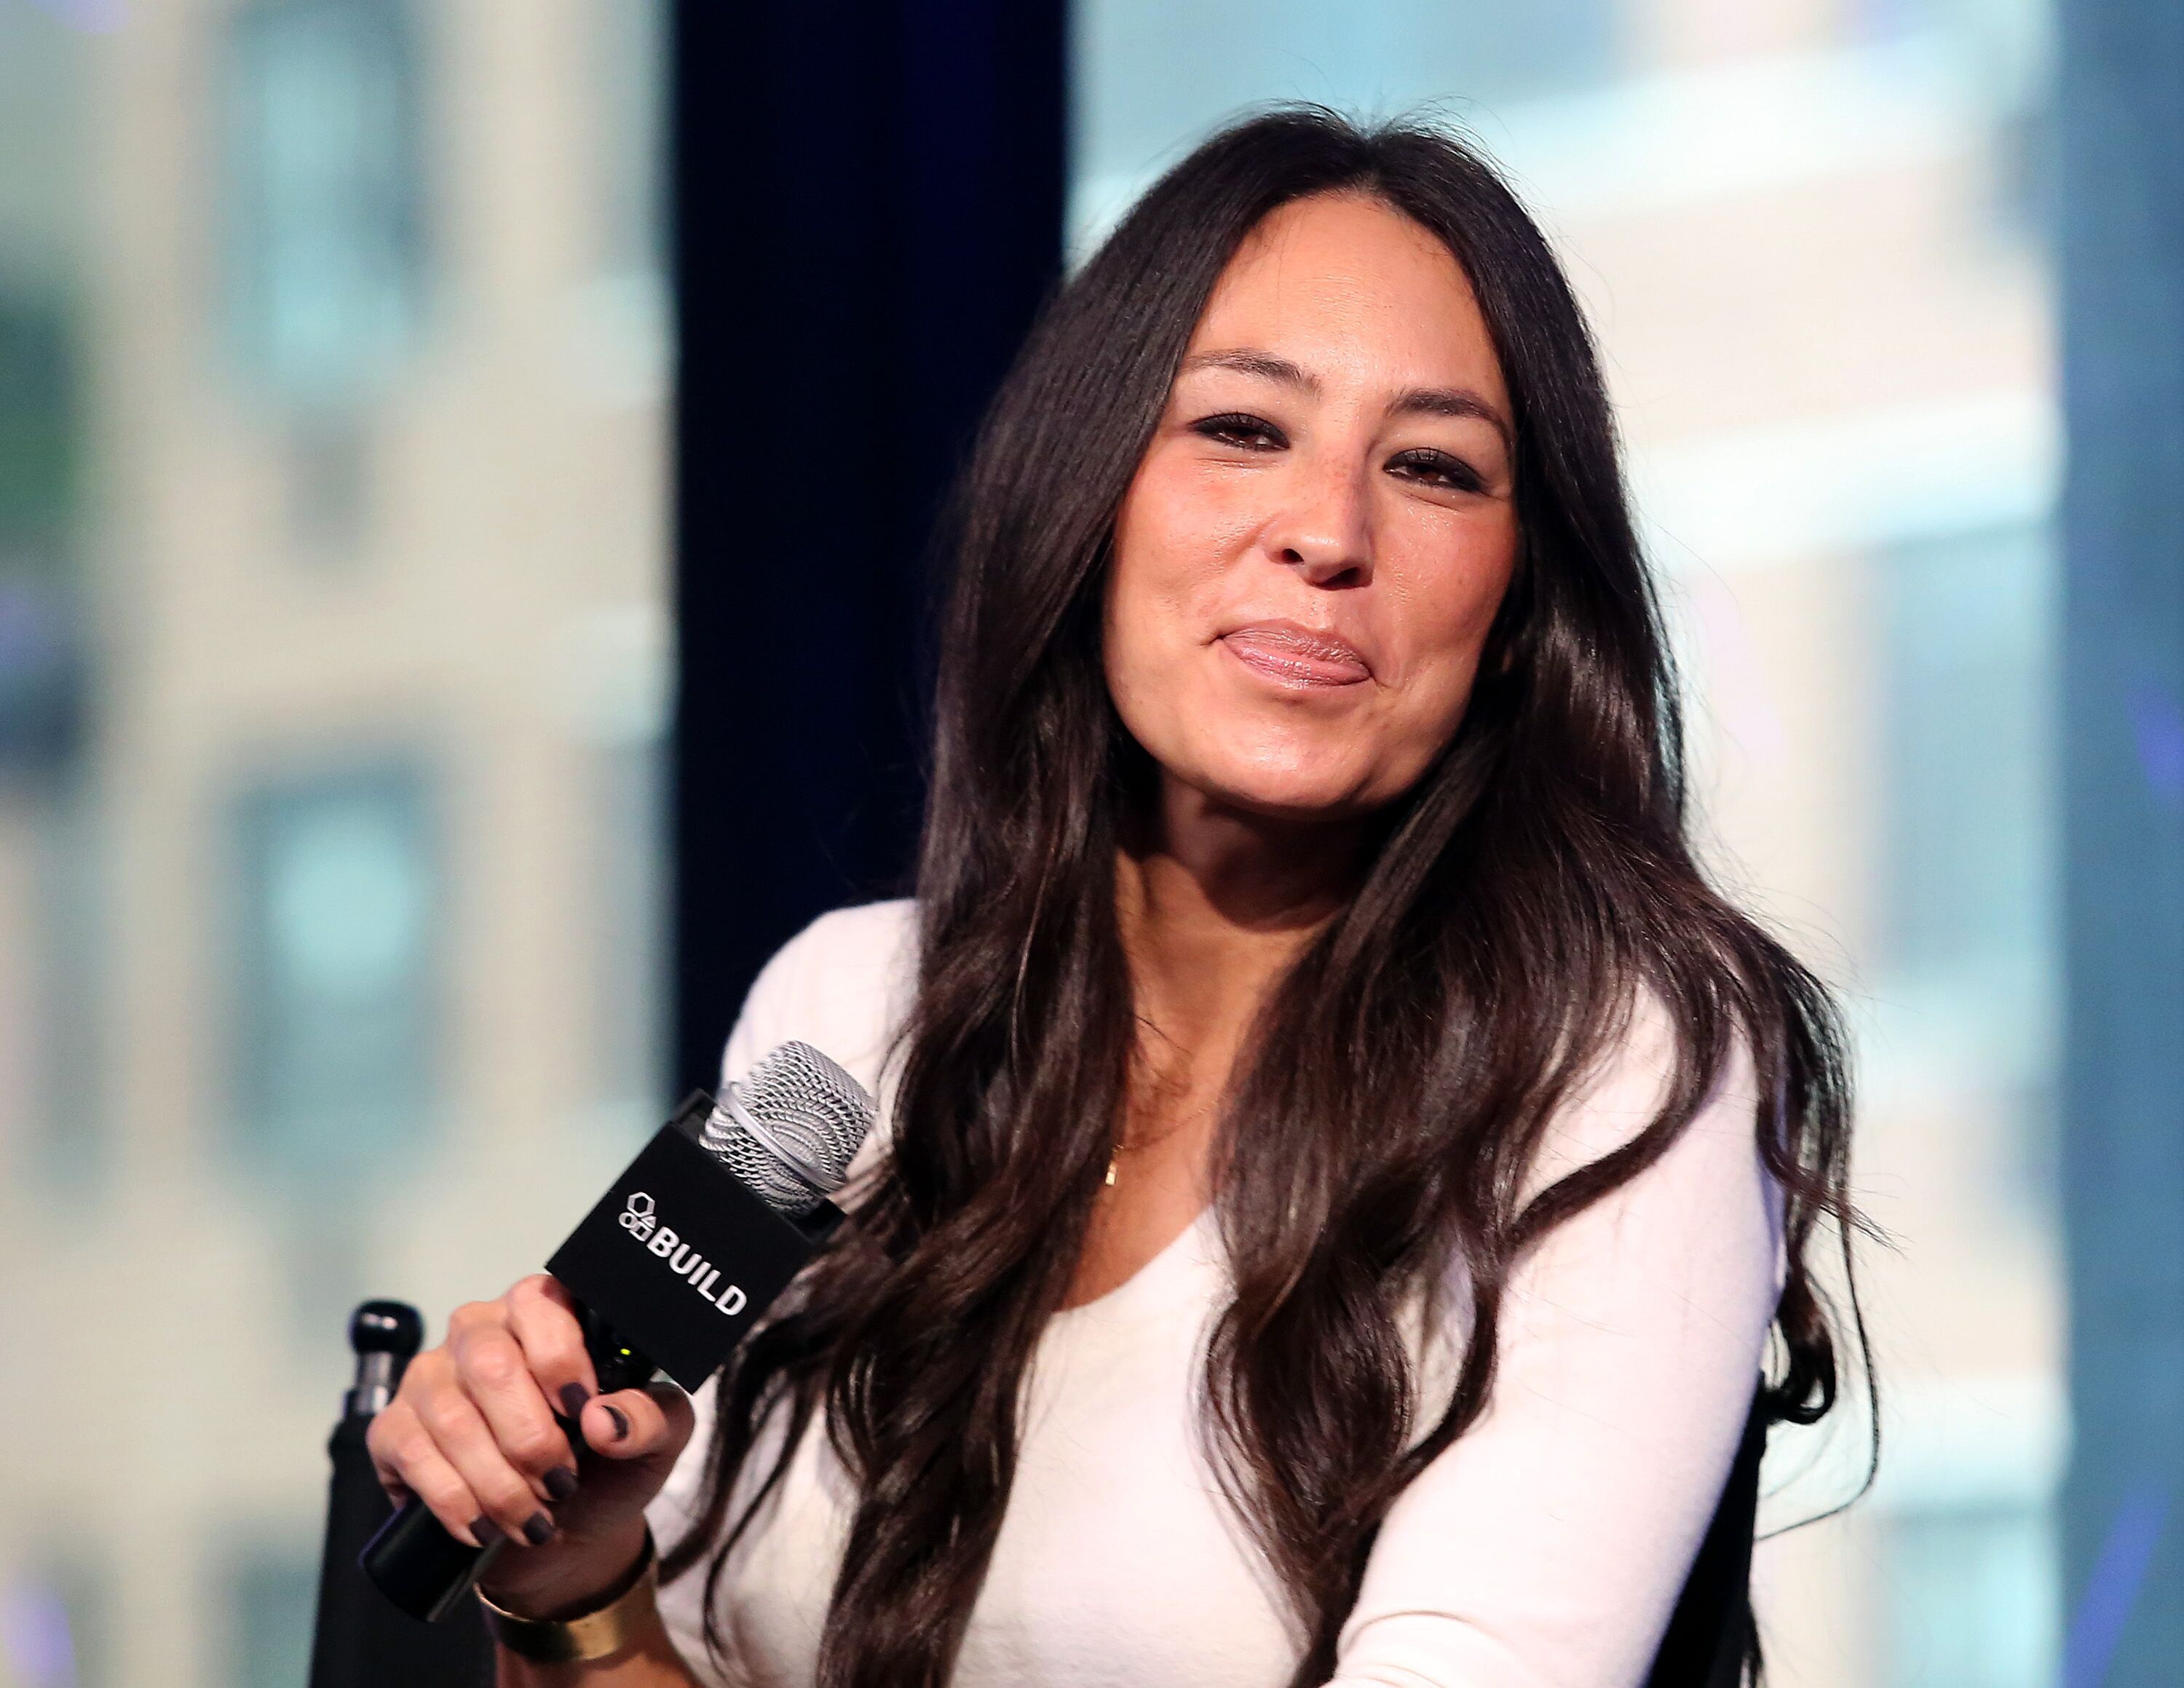 Joanna Gaines Returns to TV for the First Time after 'Fixer Upper' Ended